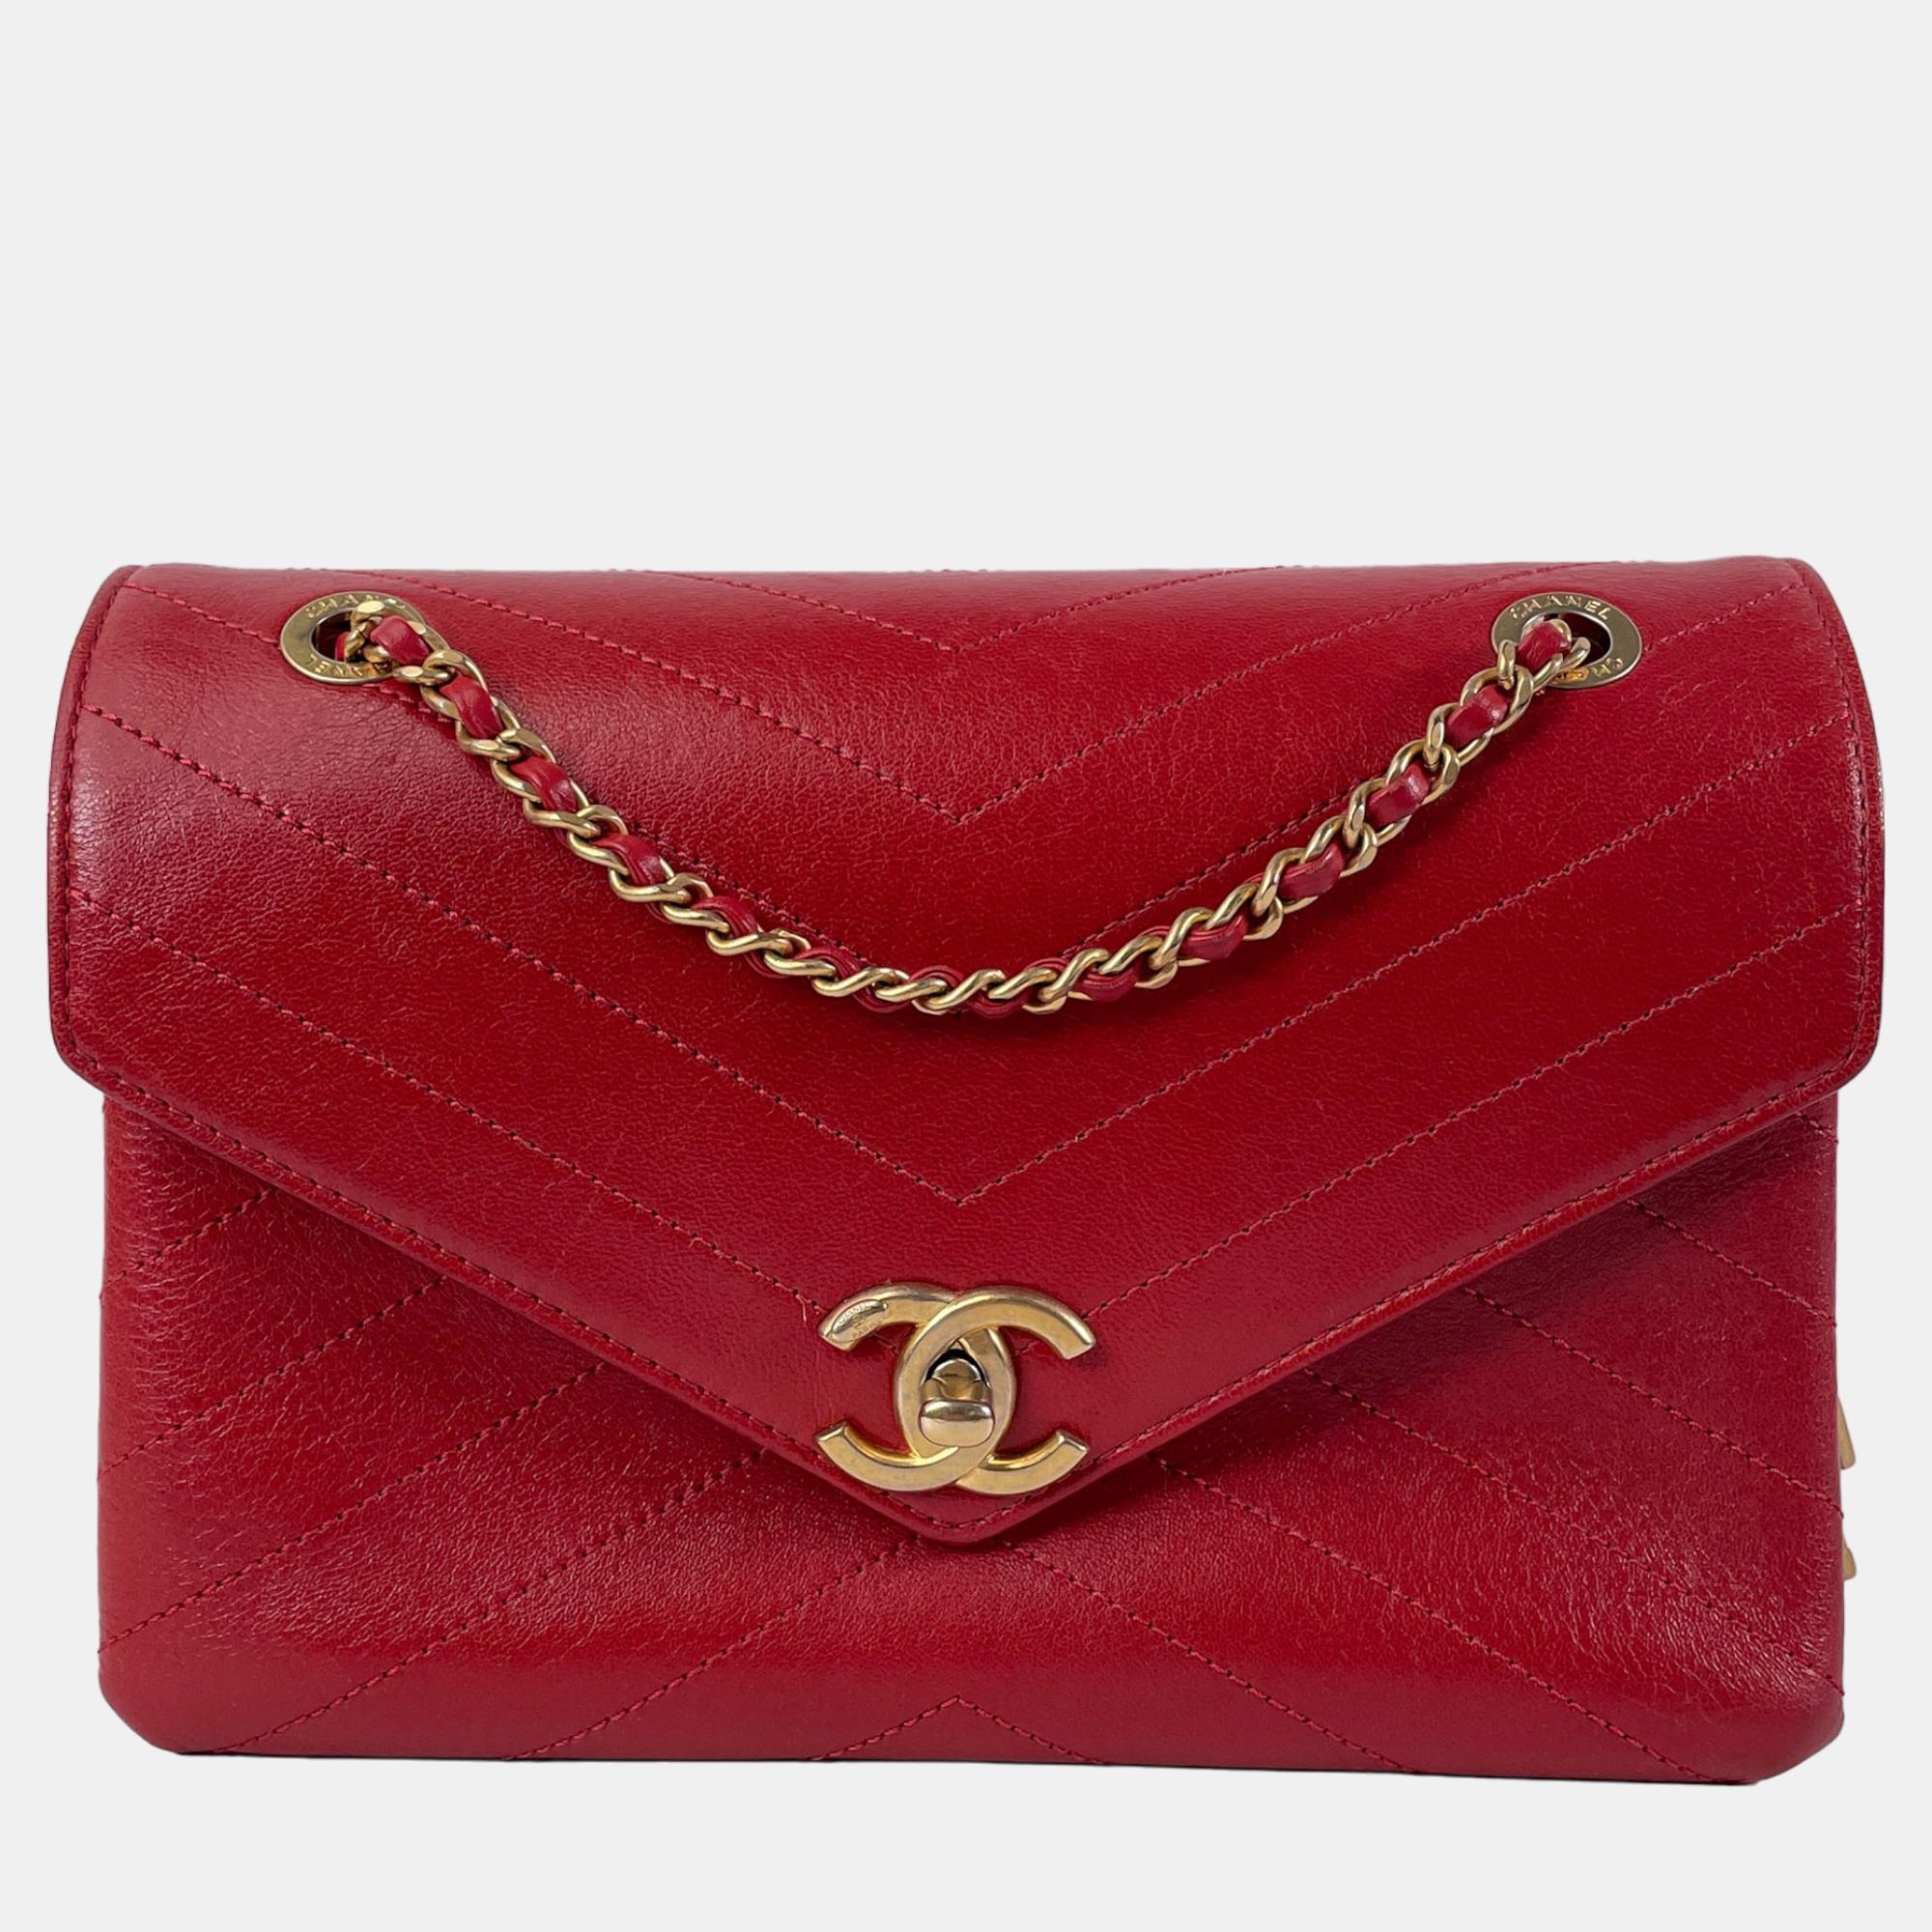 Chanel Red Small Lambskin Coco Chevron Envelope Flap Bag